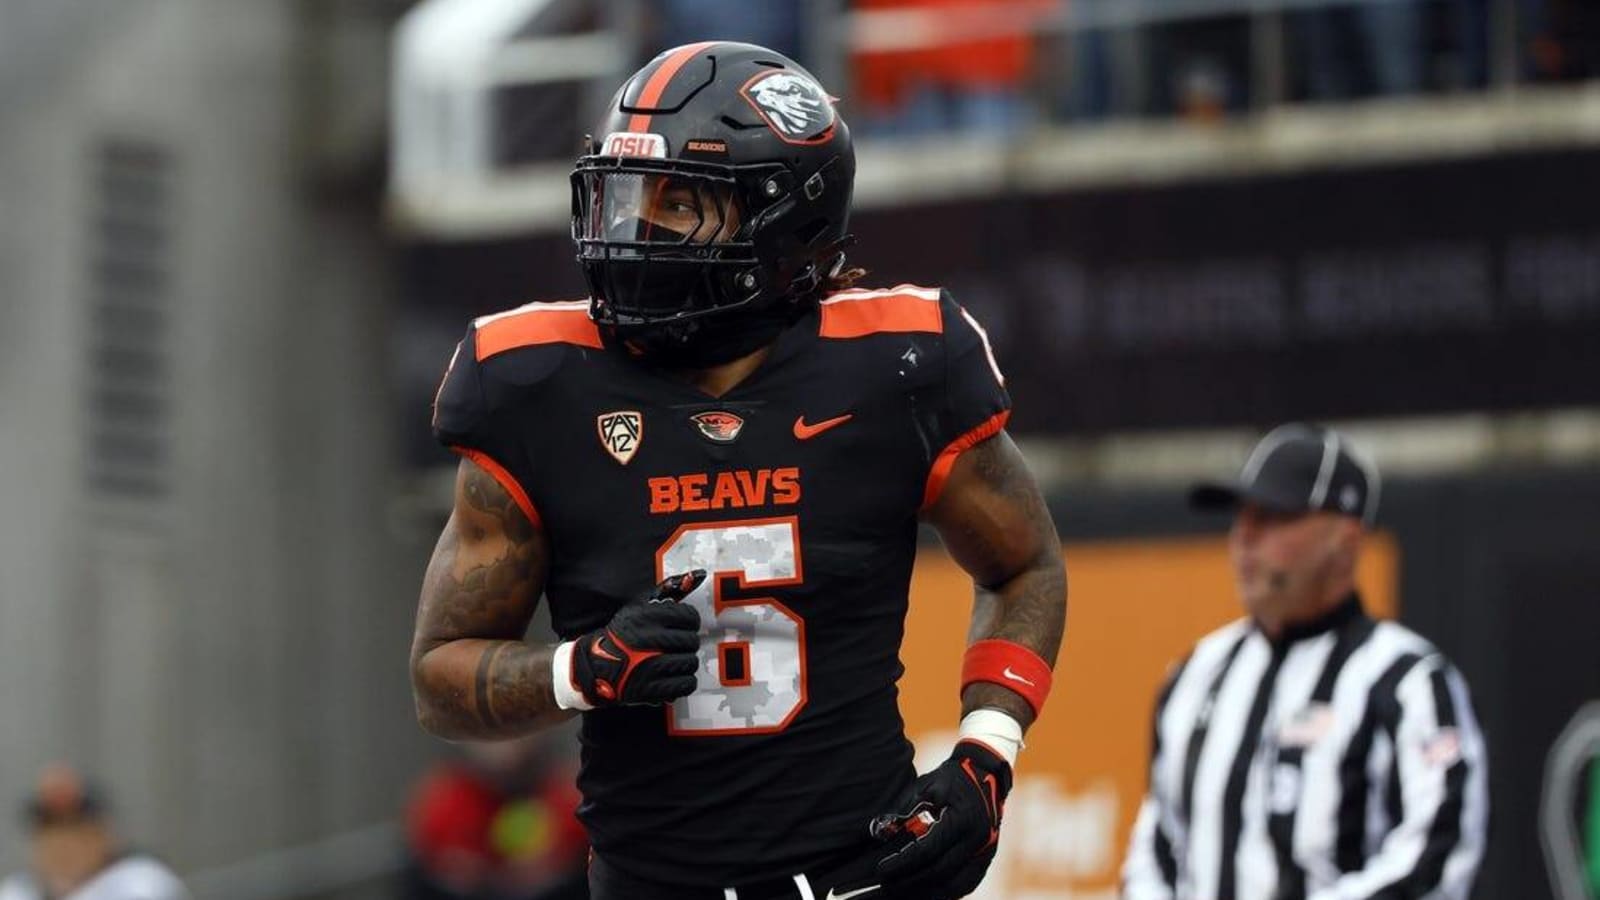 Oregon State lifts suspension on RB Damien Martinez before Sun Bowl